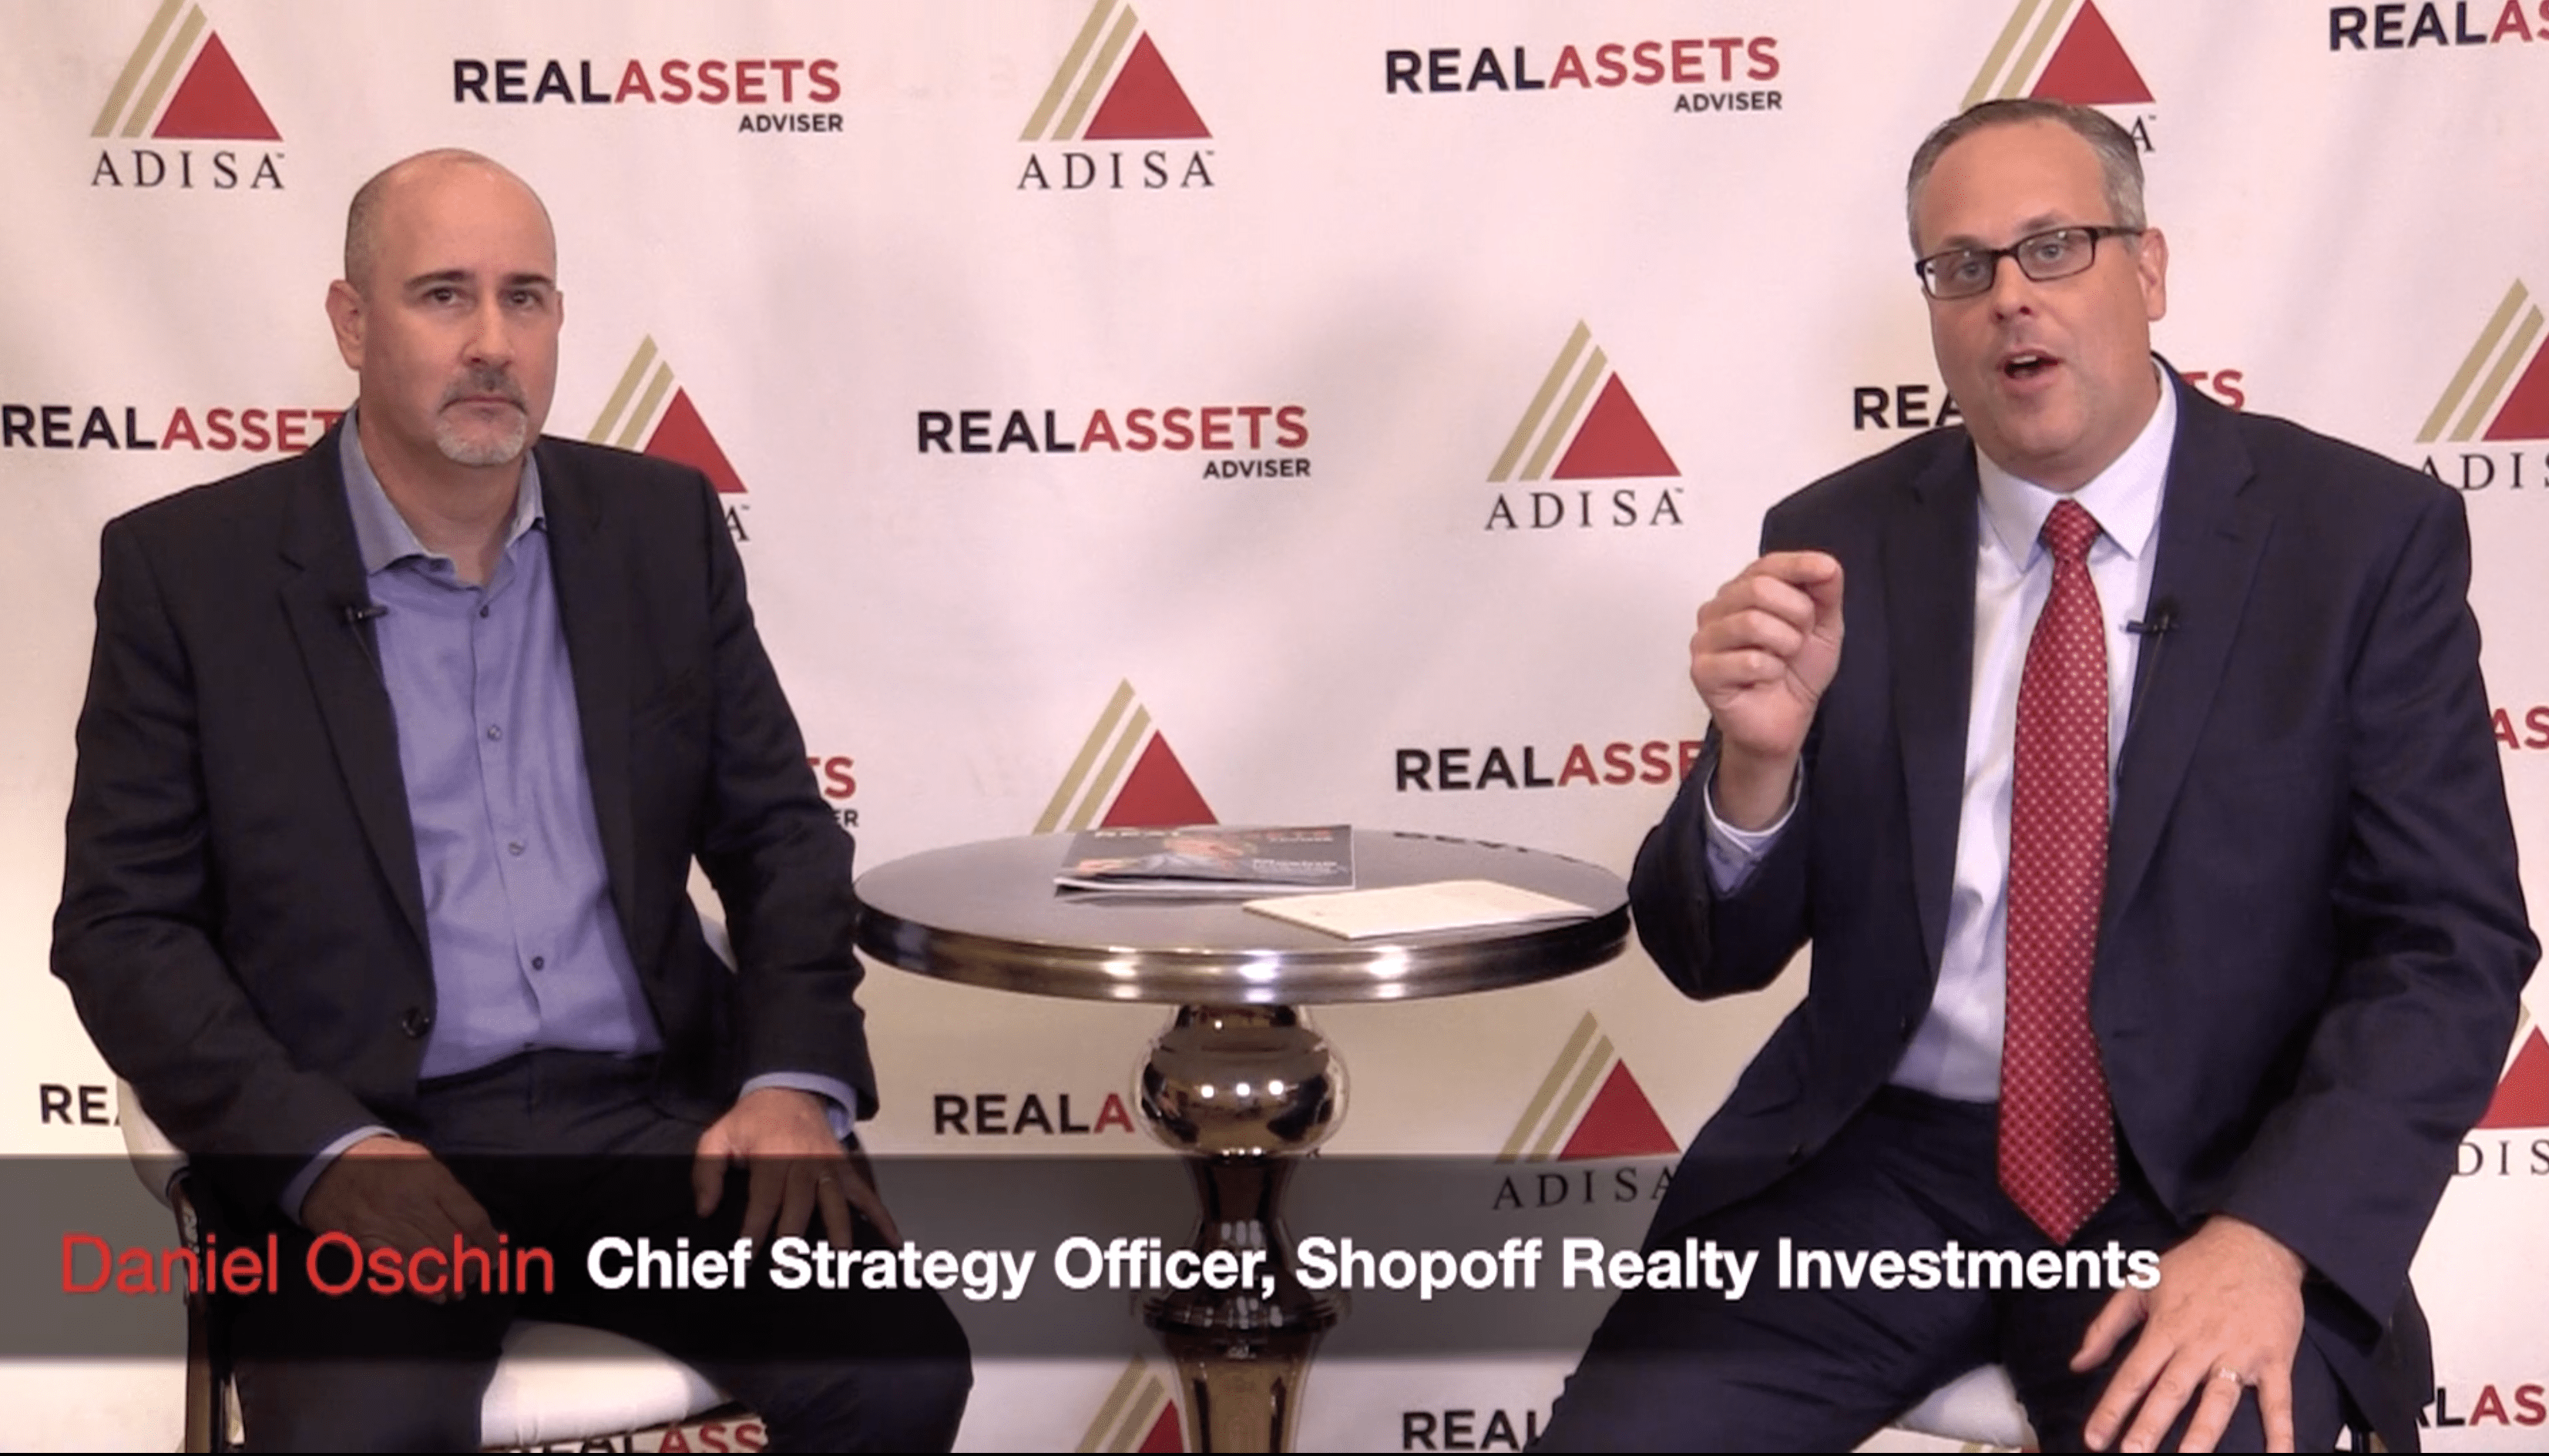 ADISA Conference: Daniel Oschin with Shopoff Realty Investments discusses Reg D and Reg A investments